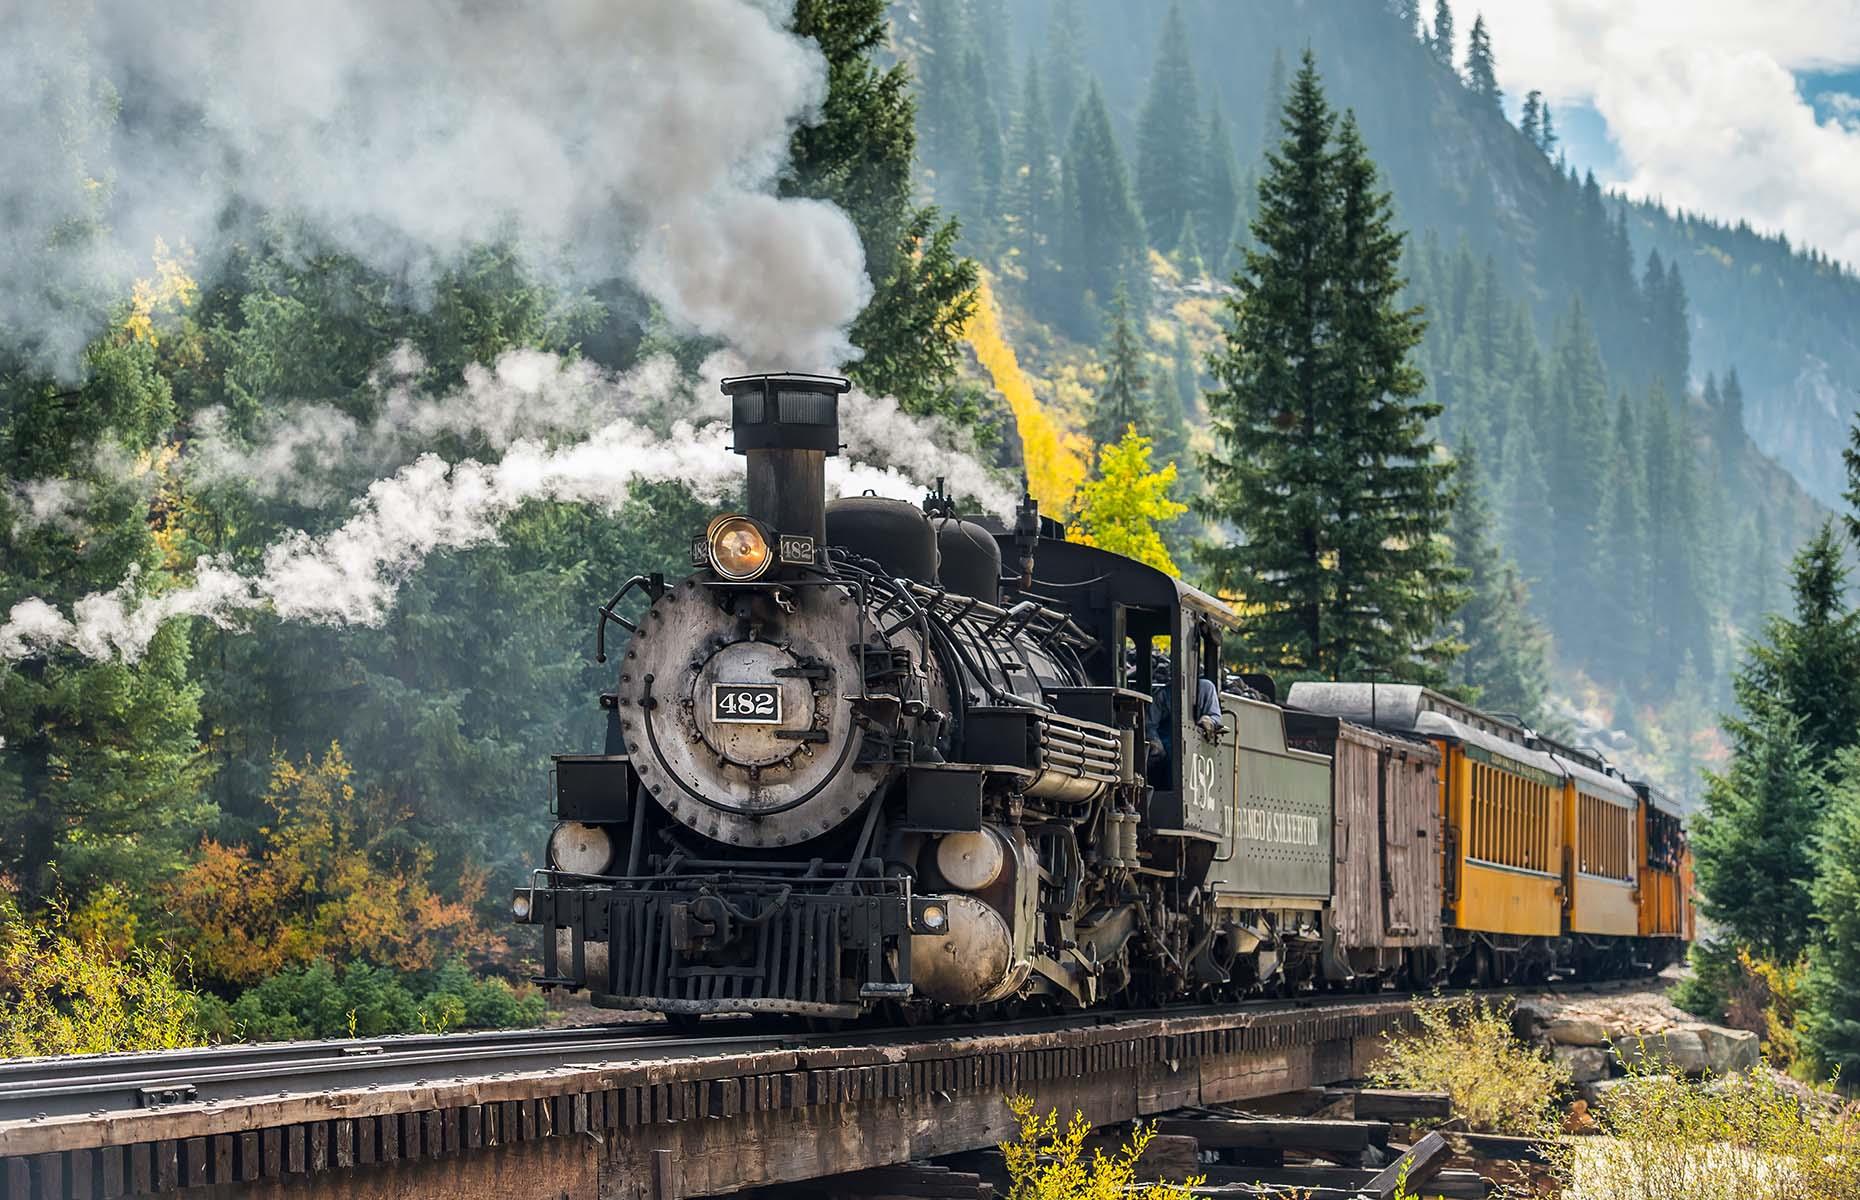 The Durango & Silverton Narrow Gauge Railroad frequently finds itself among lists of the world’s greatest train journeys – and it’s not hard to see why. On the 45-mile (72km) each way route, the train crosses the Animas River five times and winds its way through canyons in the stark wilderness of the San Juan National Forest. Travelers pass farmlands, old stagecoach roads and the brooding Tacoma Power Plant along the way.